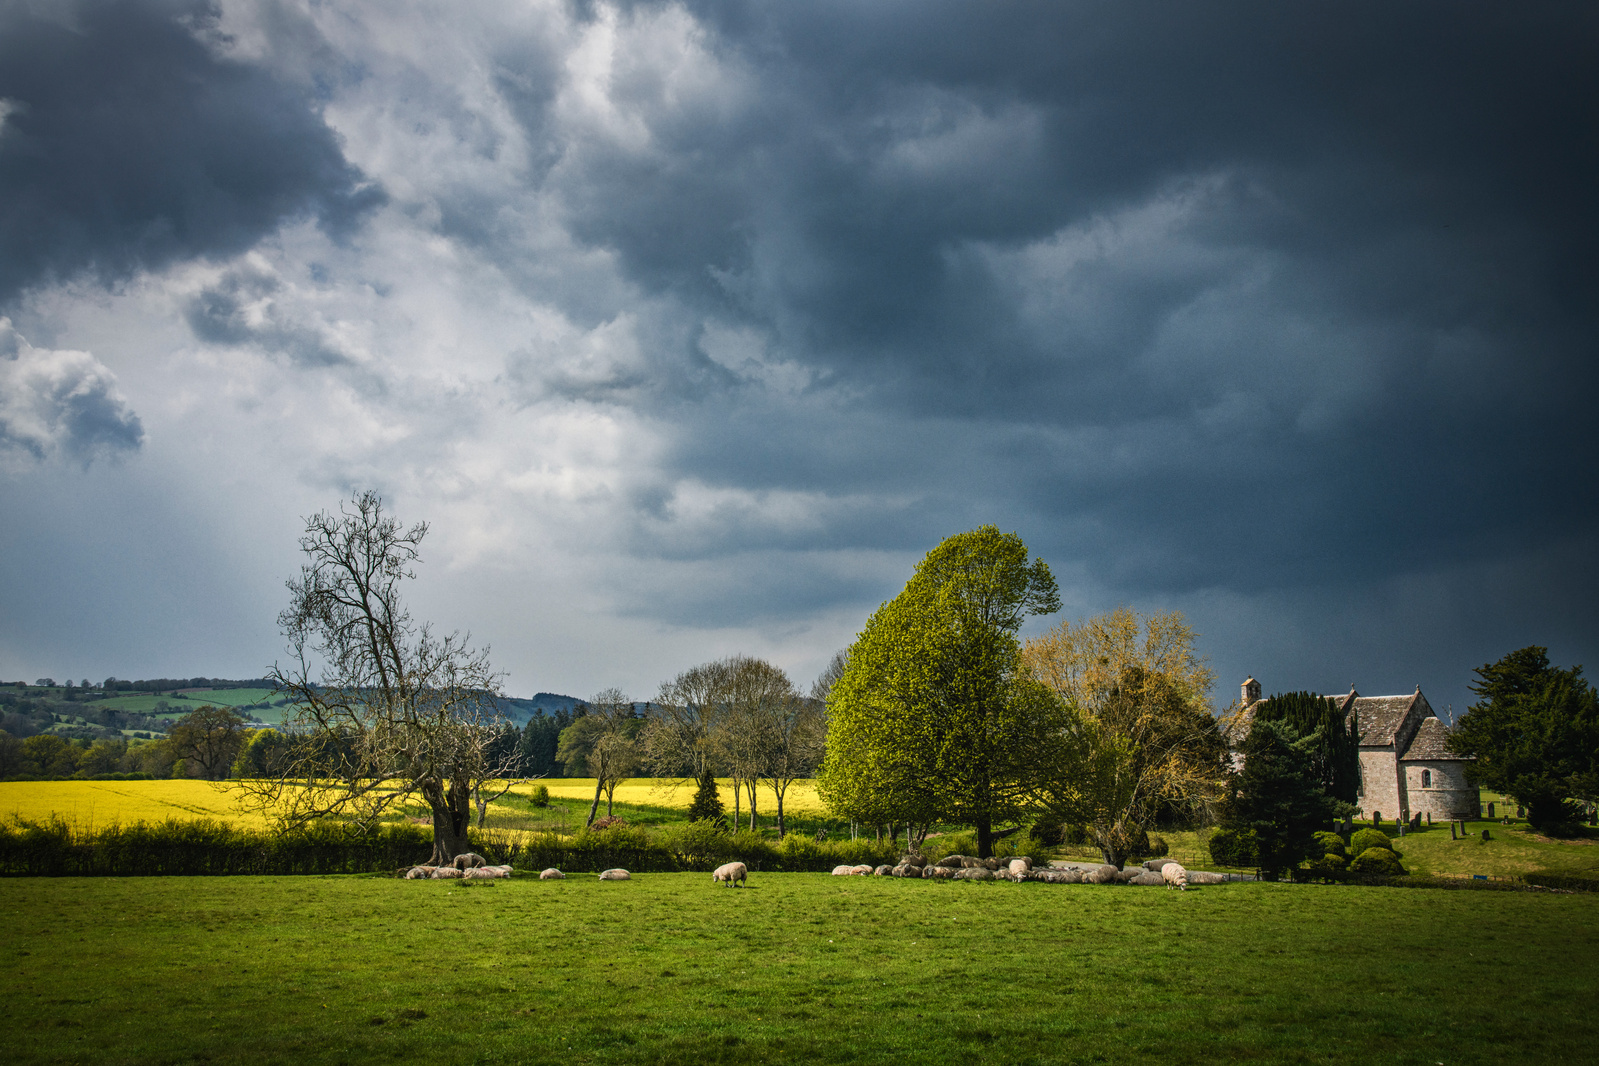 Moccas, Herefordshire in England as a storm rolls in over the rapeseed field